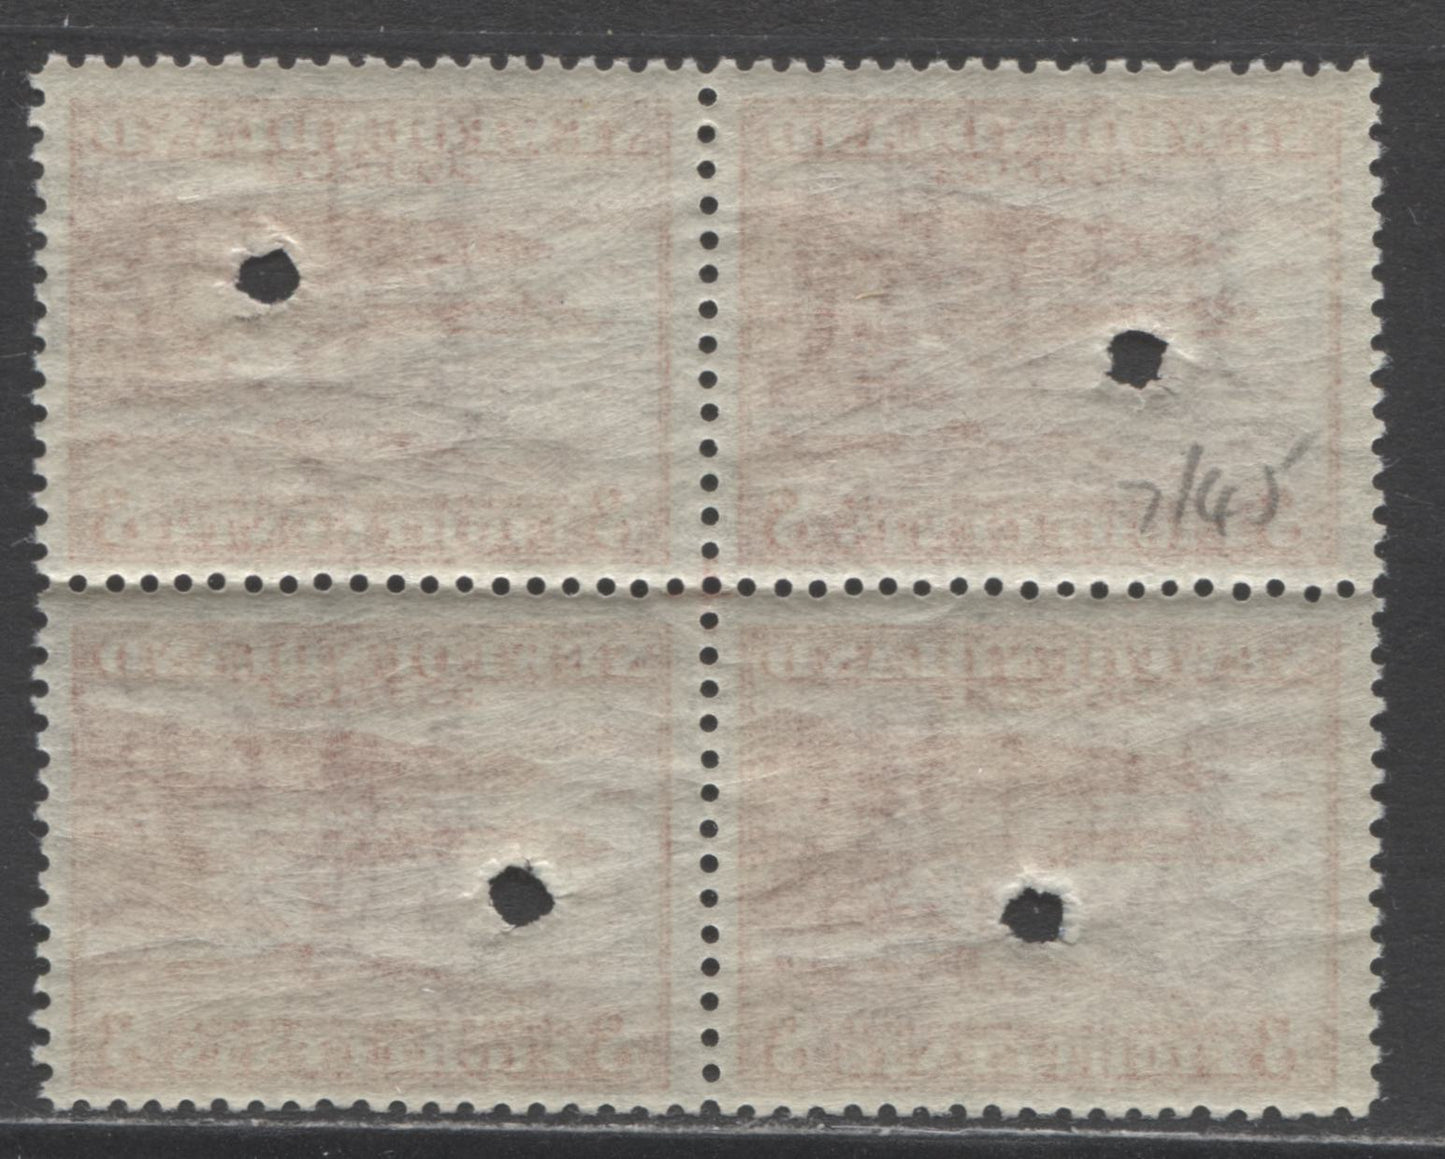 Lot 353 Newfoundland #259var 8c Brownish Scarlet Corner Brook, 1941-1944 Second Resources Issue, A VFNH Block of 4 Requisition Proof Block of 4 With Perforation Cross Guide Mark